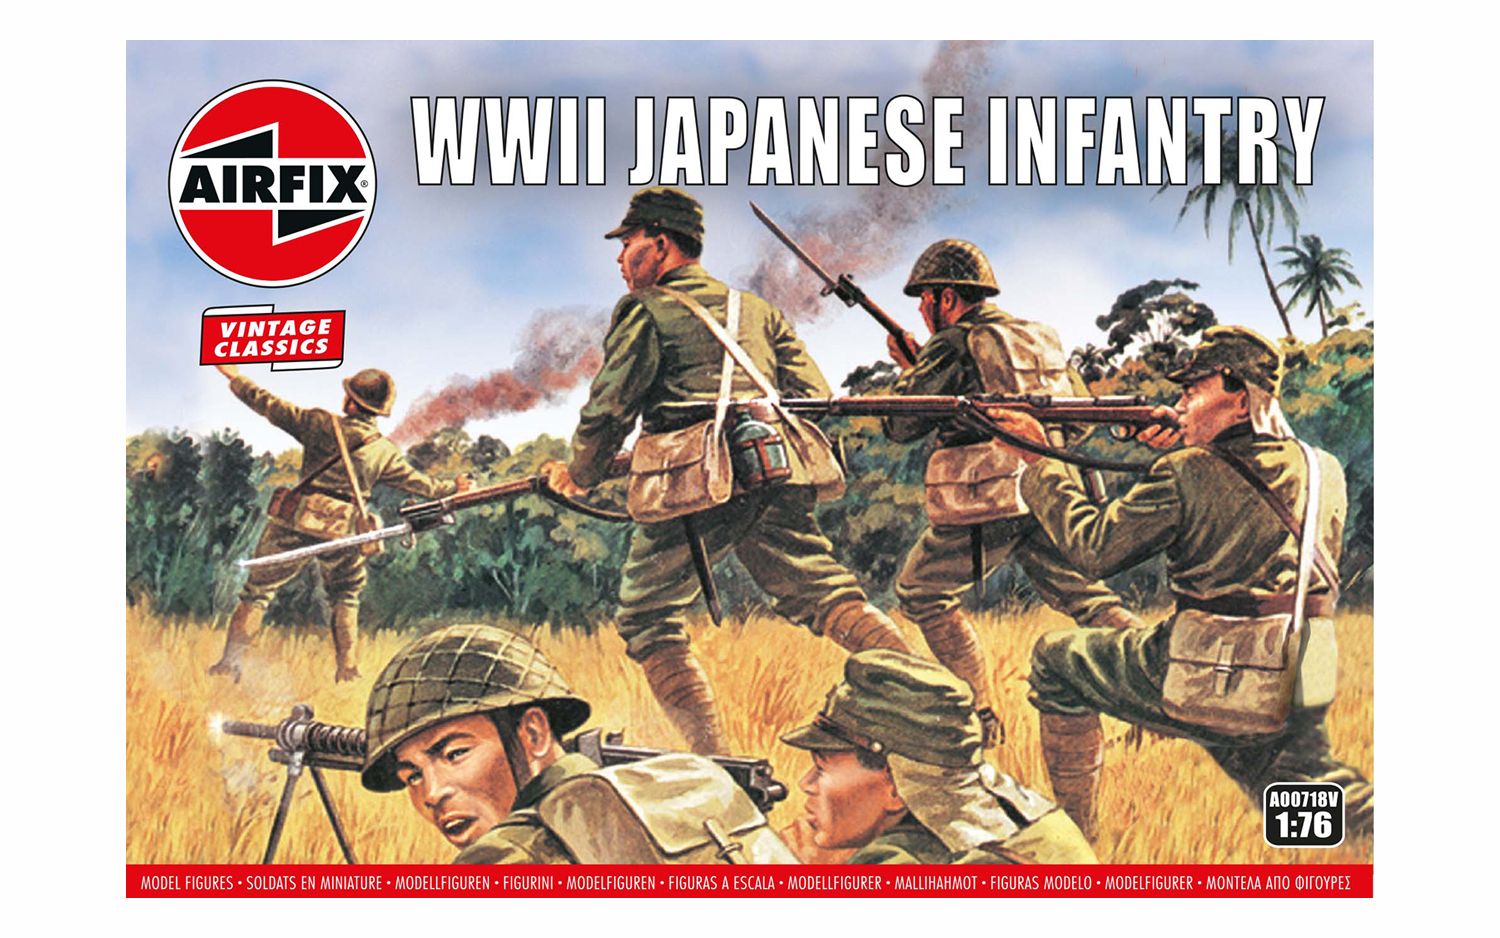 WWII Japanese Infantry (1:76) - Loaded Dice Barry Vale of Glamorgan CF64 3HD